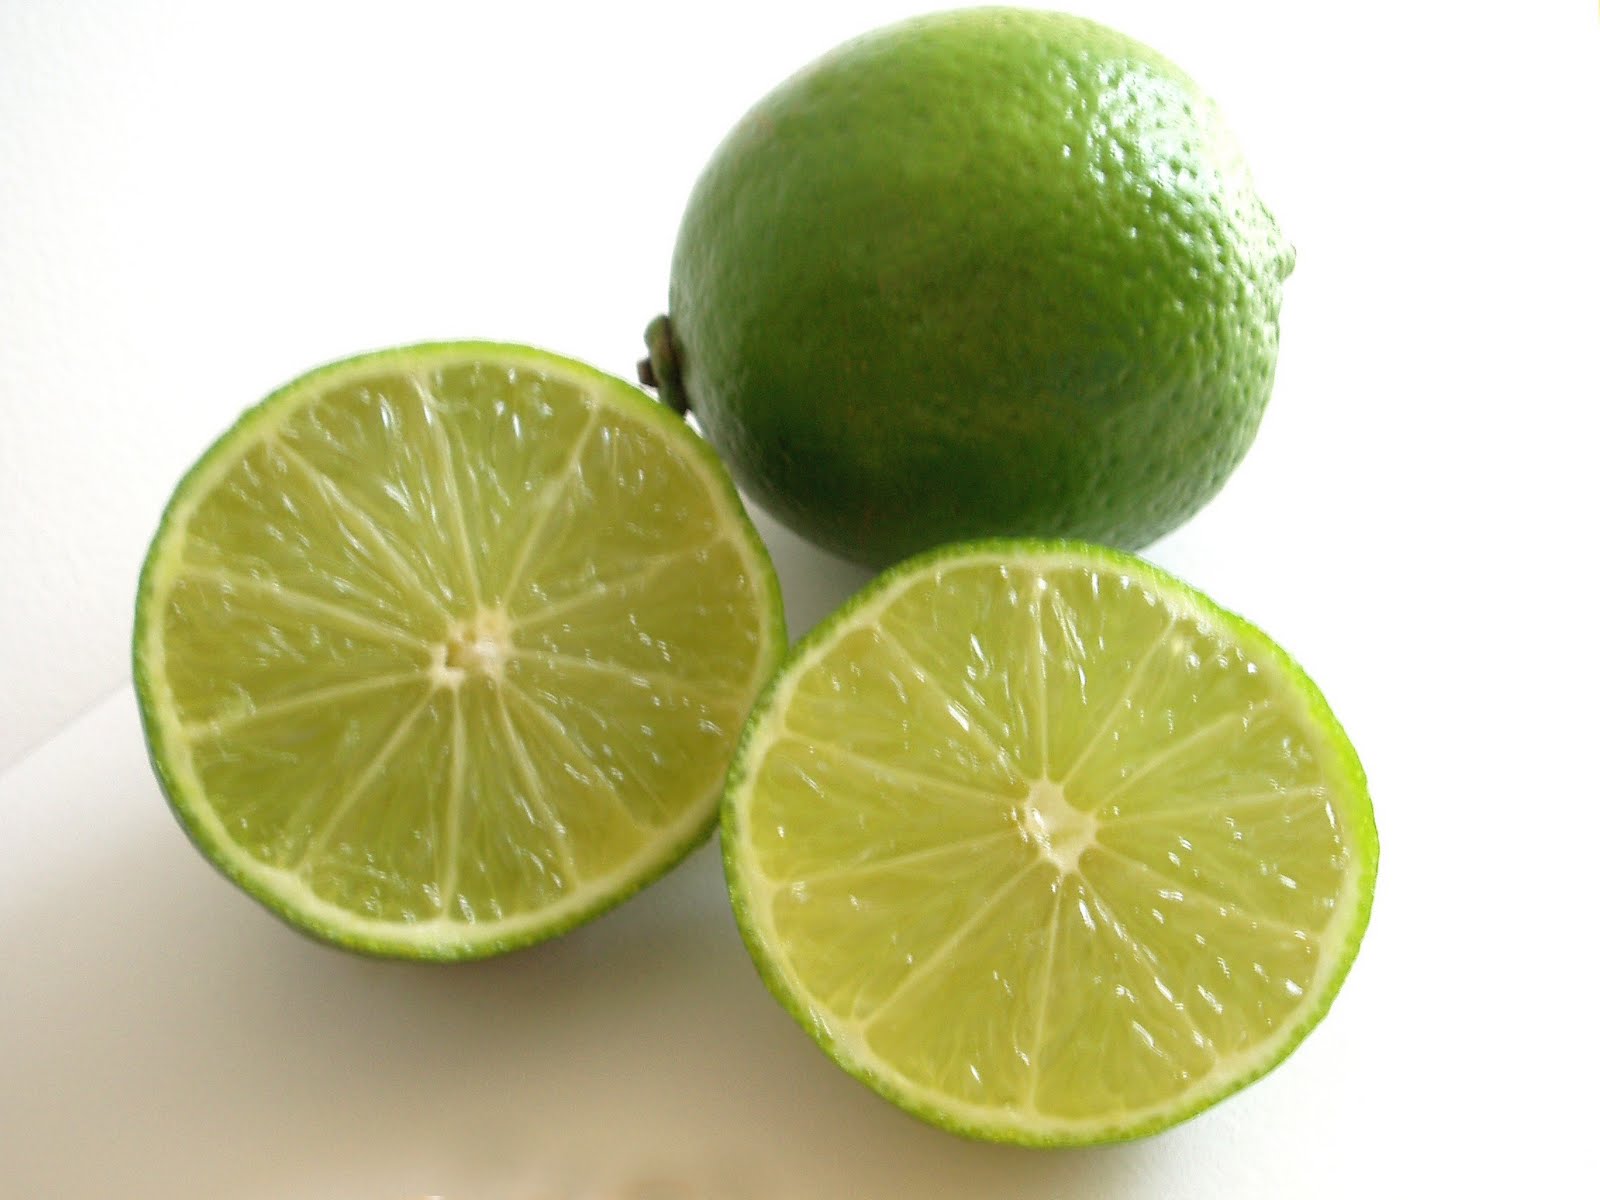 Lighten Dark Armpits Naturally with Lime